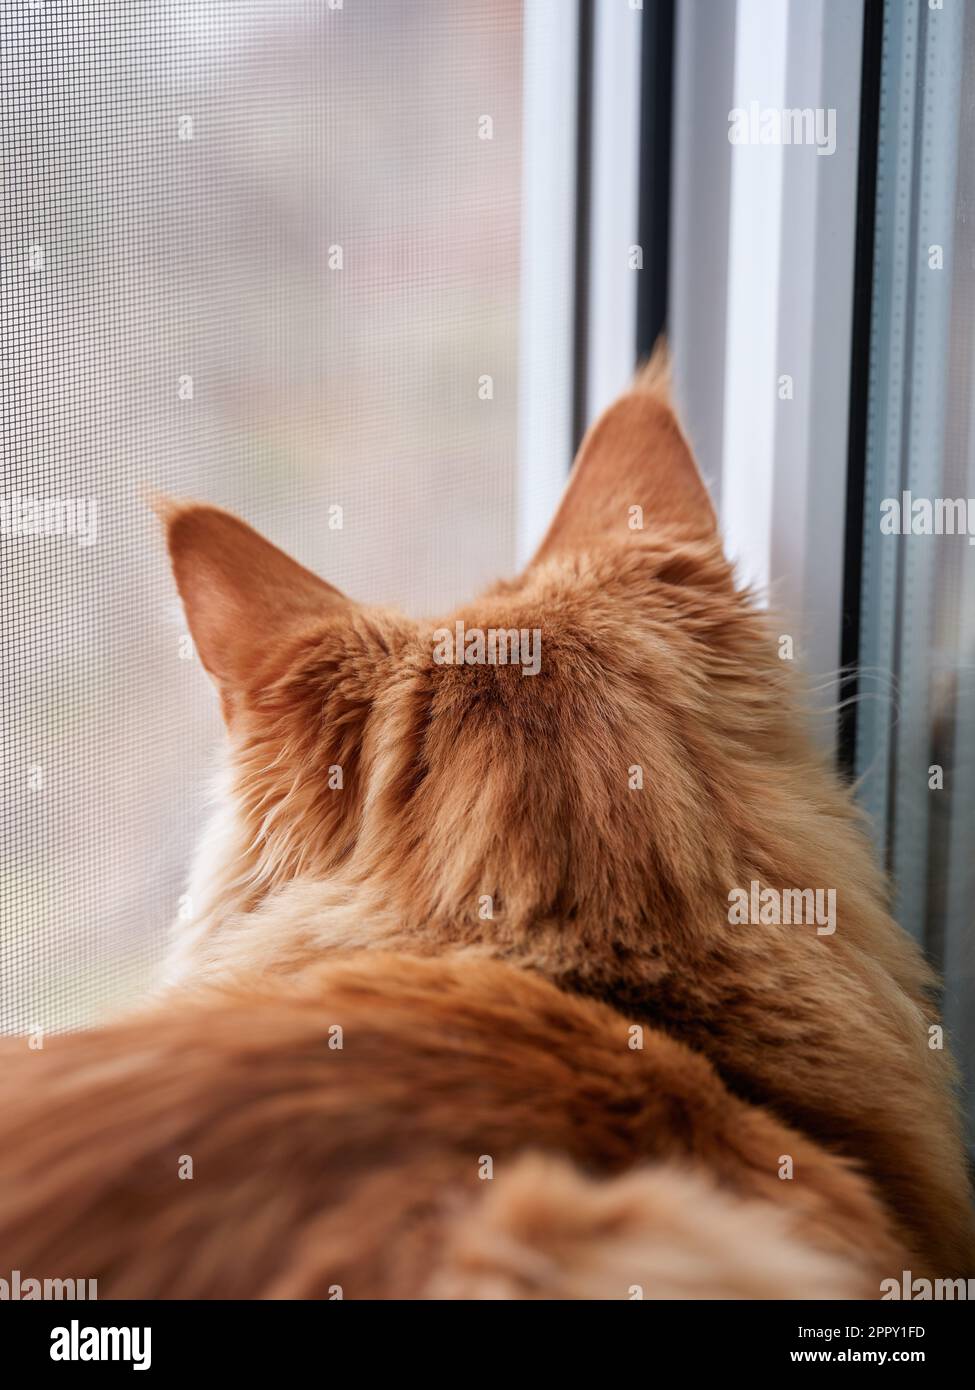 A red Maine coon cat looking through a window with a mosquito net. Shallow depth of field. Close up. Stock Photo